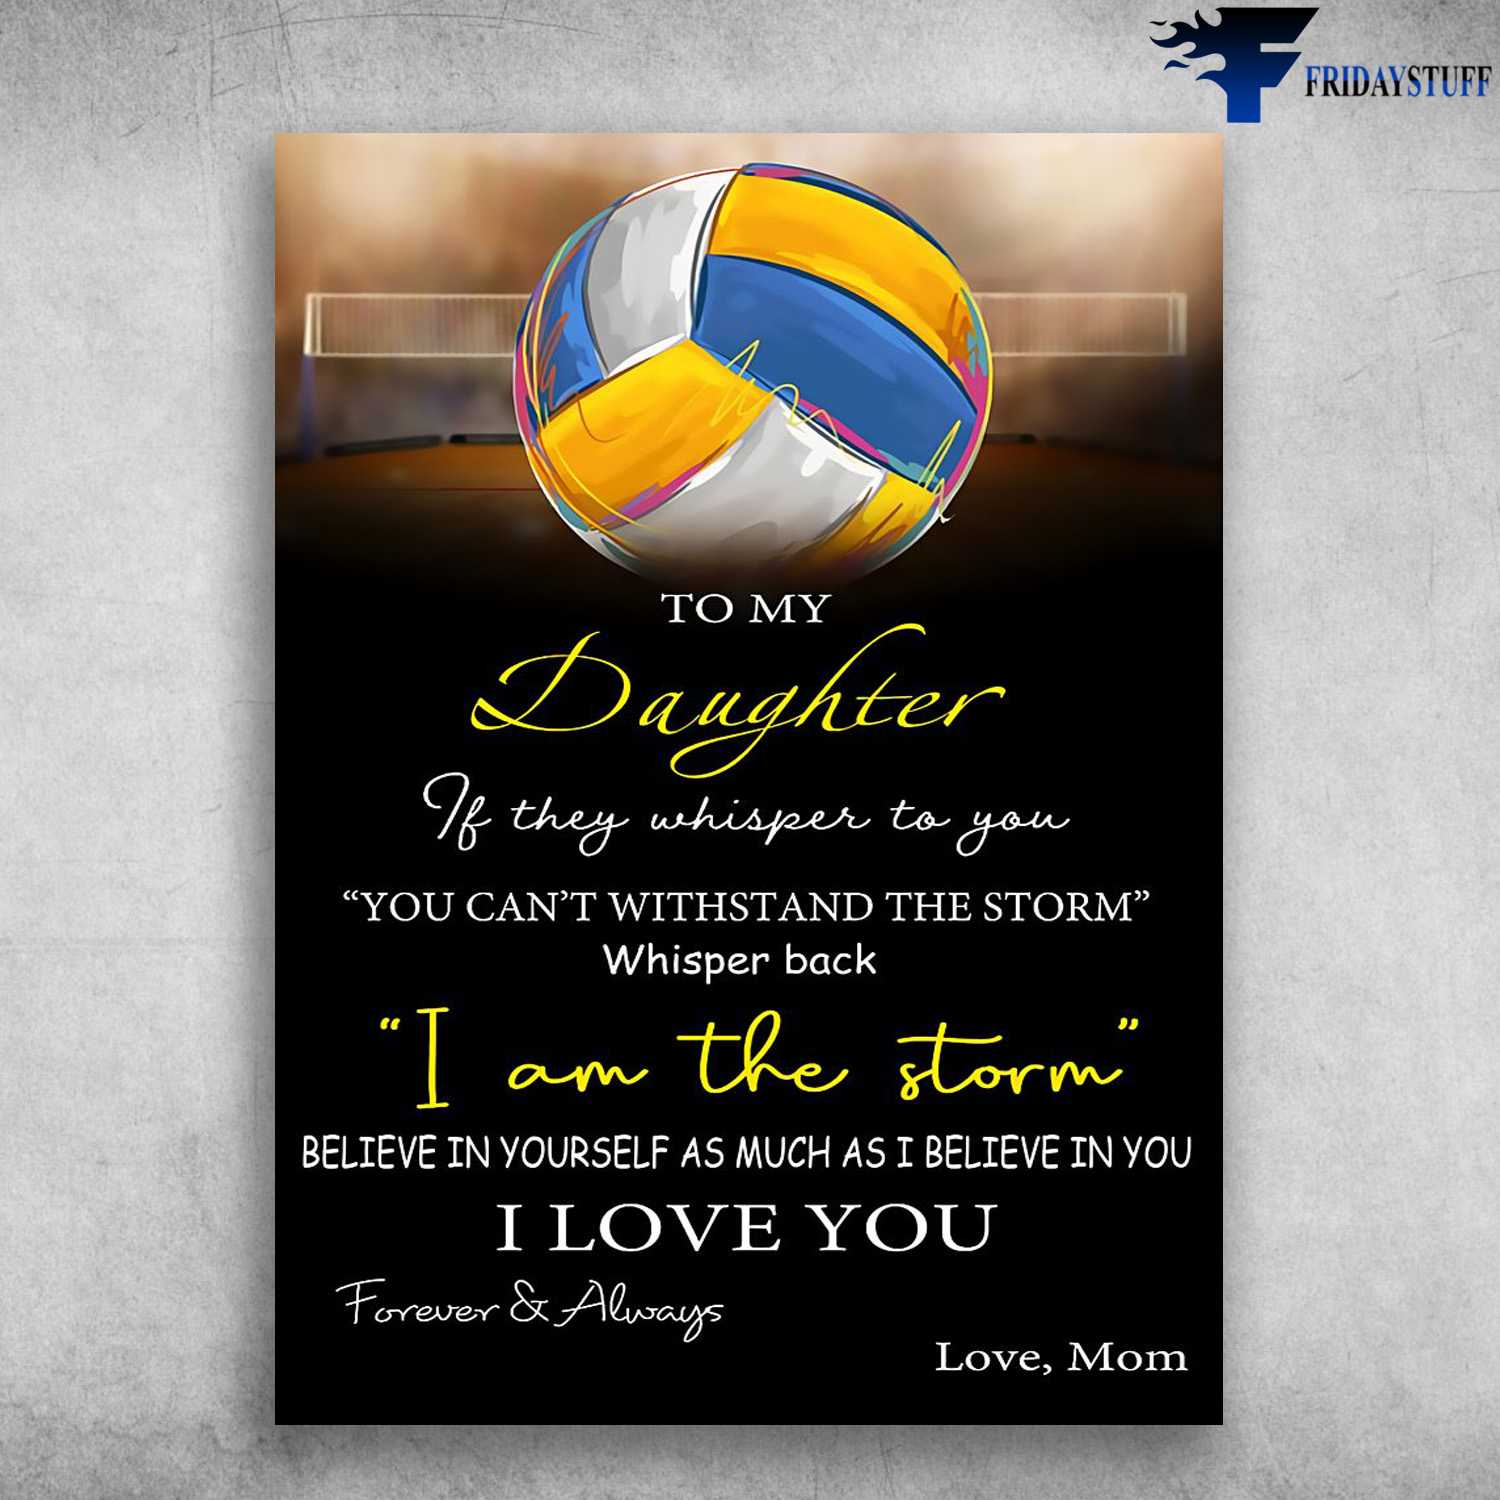 Volleyball Poster, Volleyball Decor, To My Daughter, If They Whisper To You, You Can't Withstand The Storm, Whisper Back, I Am The Storm